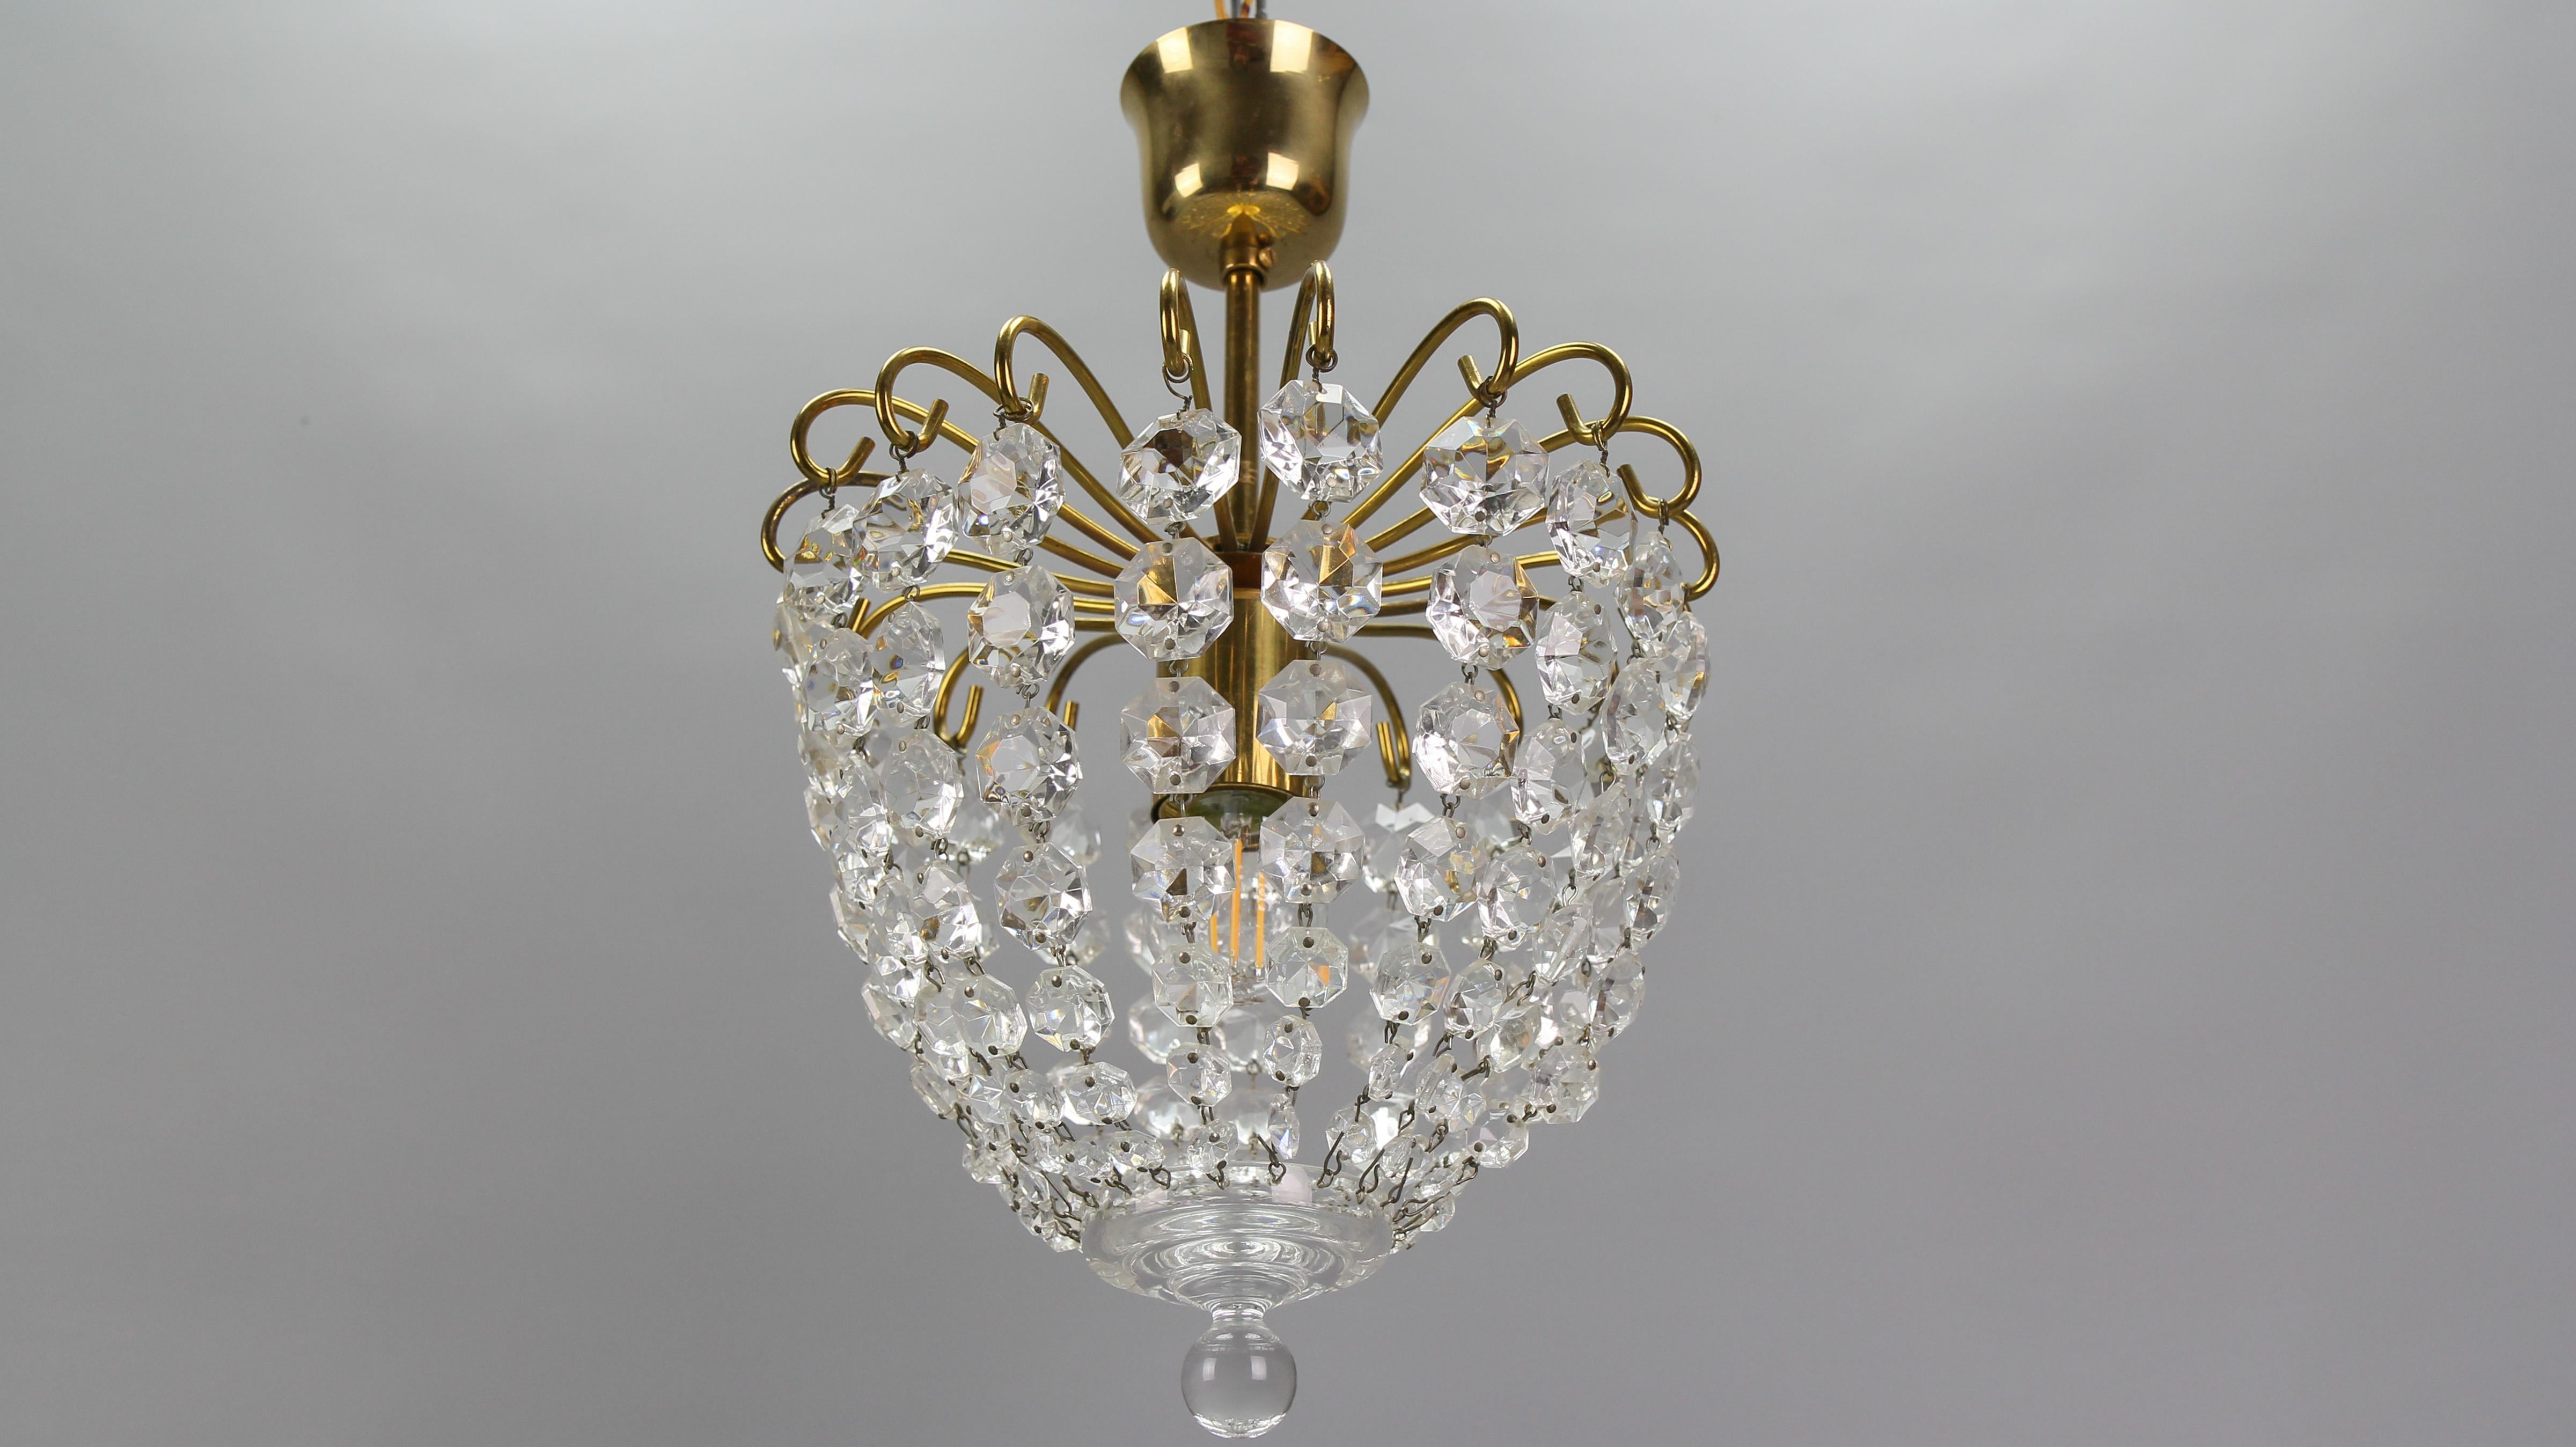 Crystal glass and brass ceiling light from circa the 1970s, Germany.
Adorable and compact basket-shaped single-light pendant chandelier attributed to Palwa (Palme & Walter).
One socket for E27 (E26) size light bulb.
Dimensions: height: 34 cm / 13.38